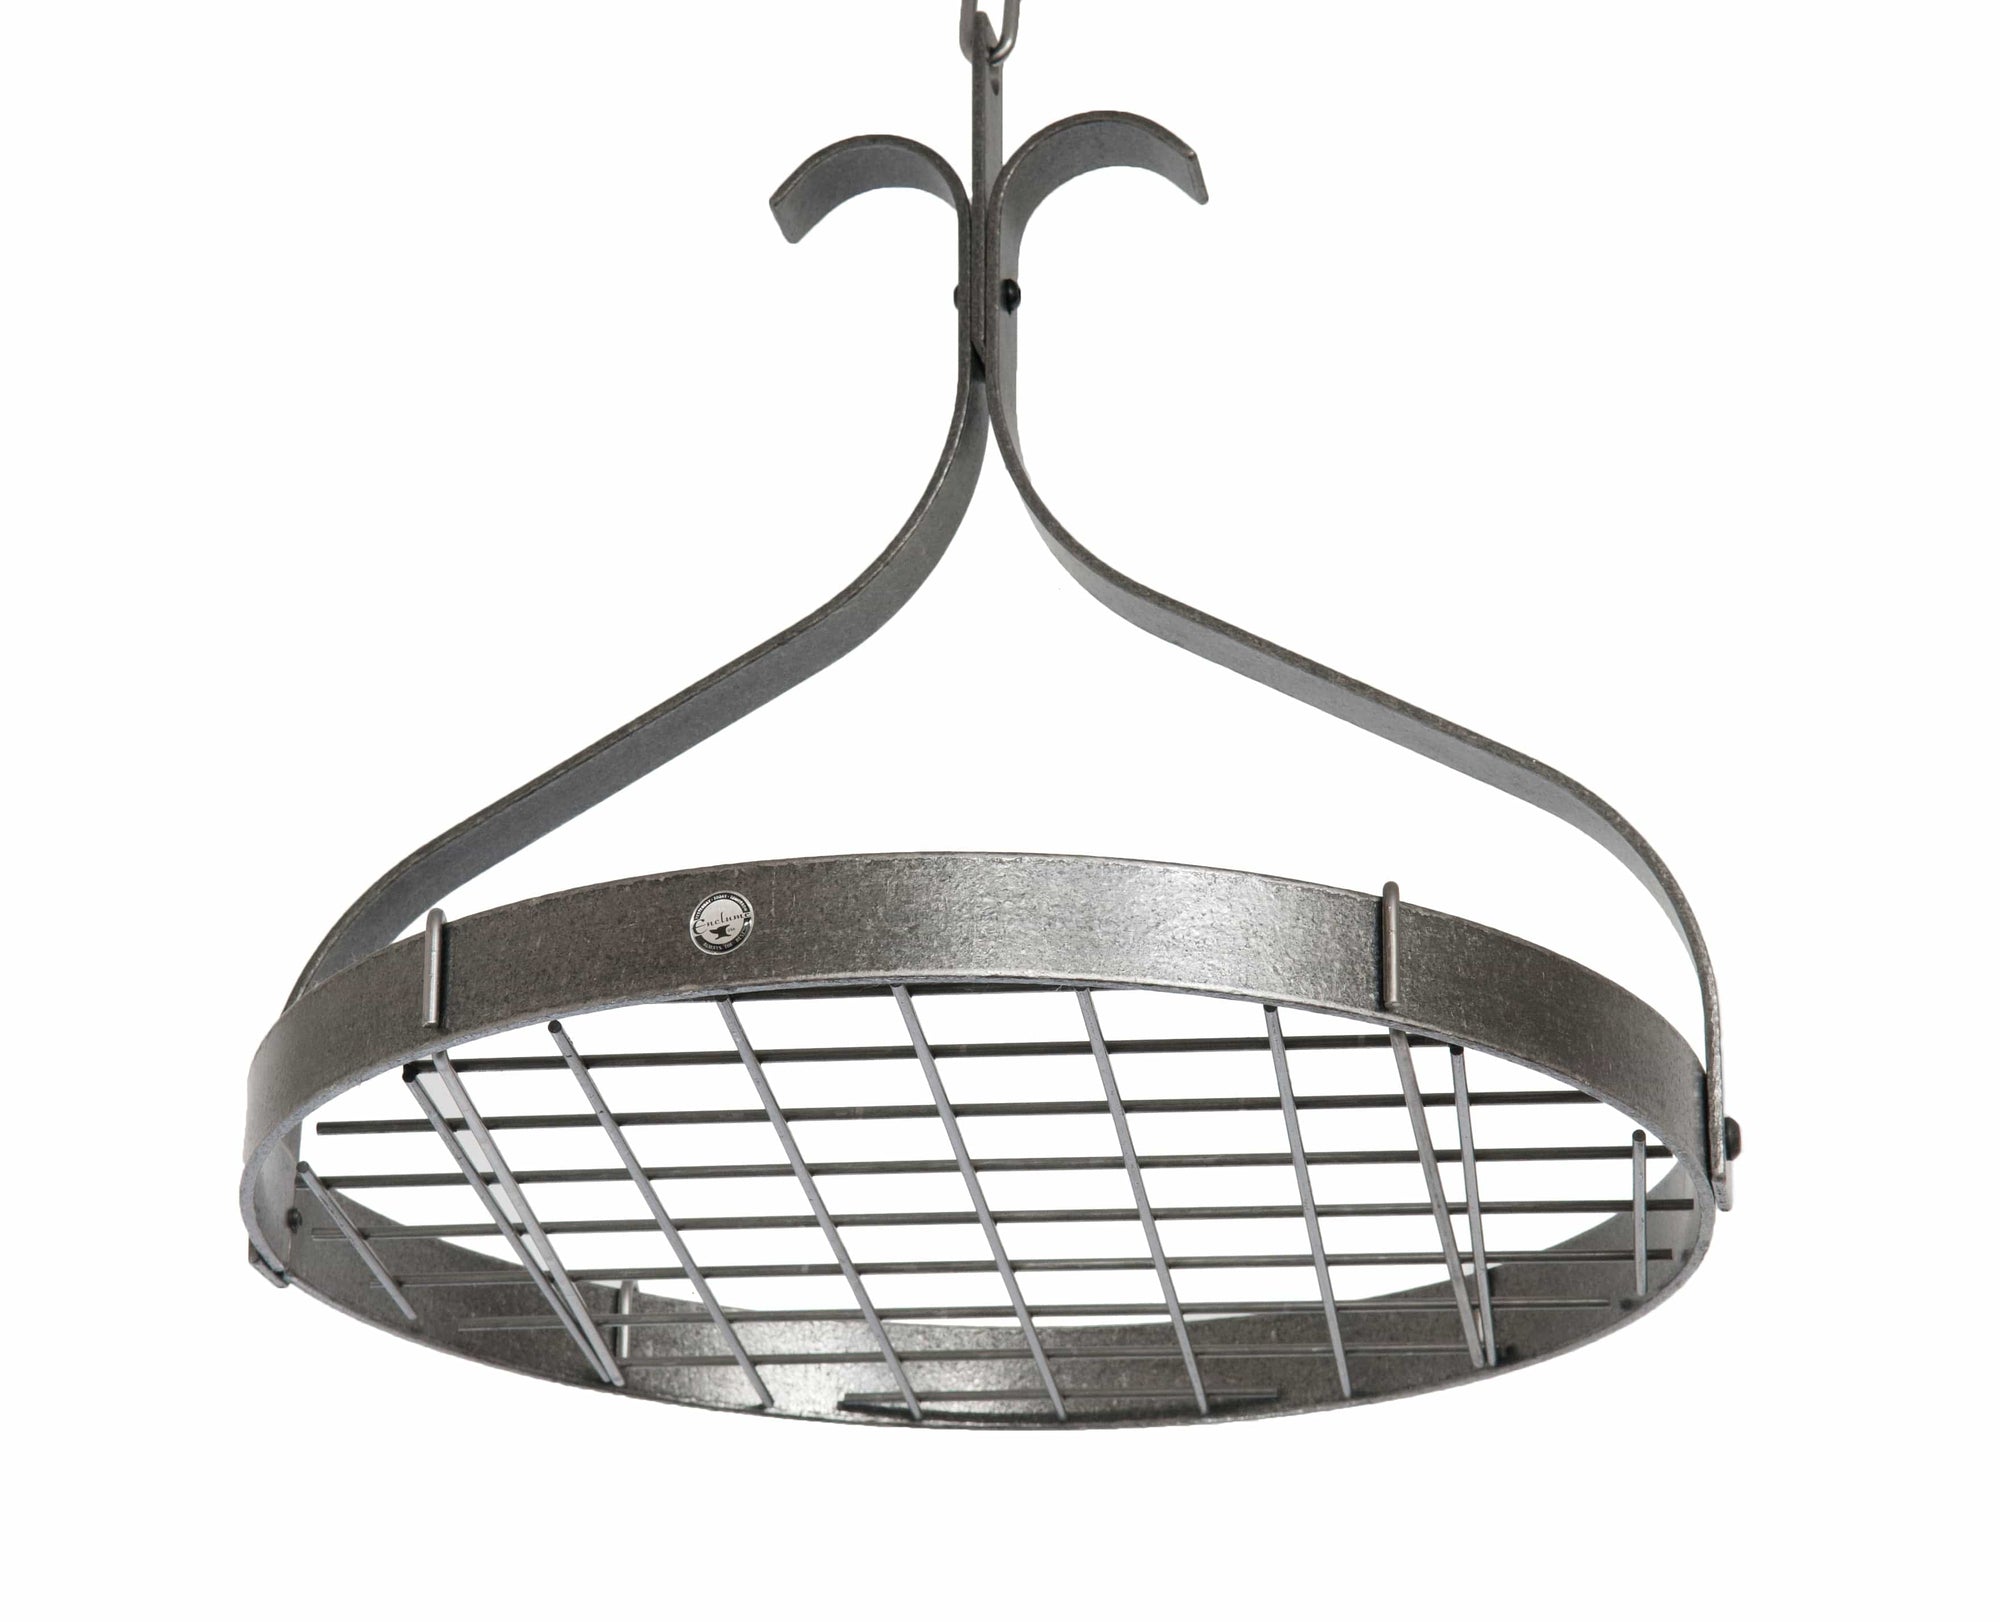 Enclume - Handcrafted Circle Ceiling Rack w 6 Hooks Hammered Steel -  Enclume Design Products